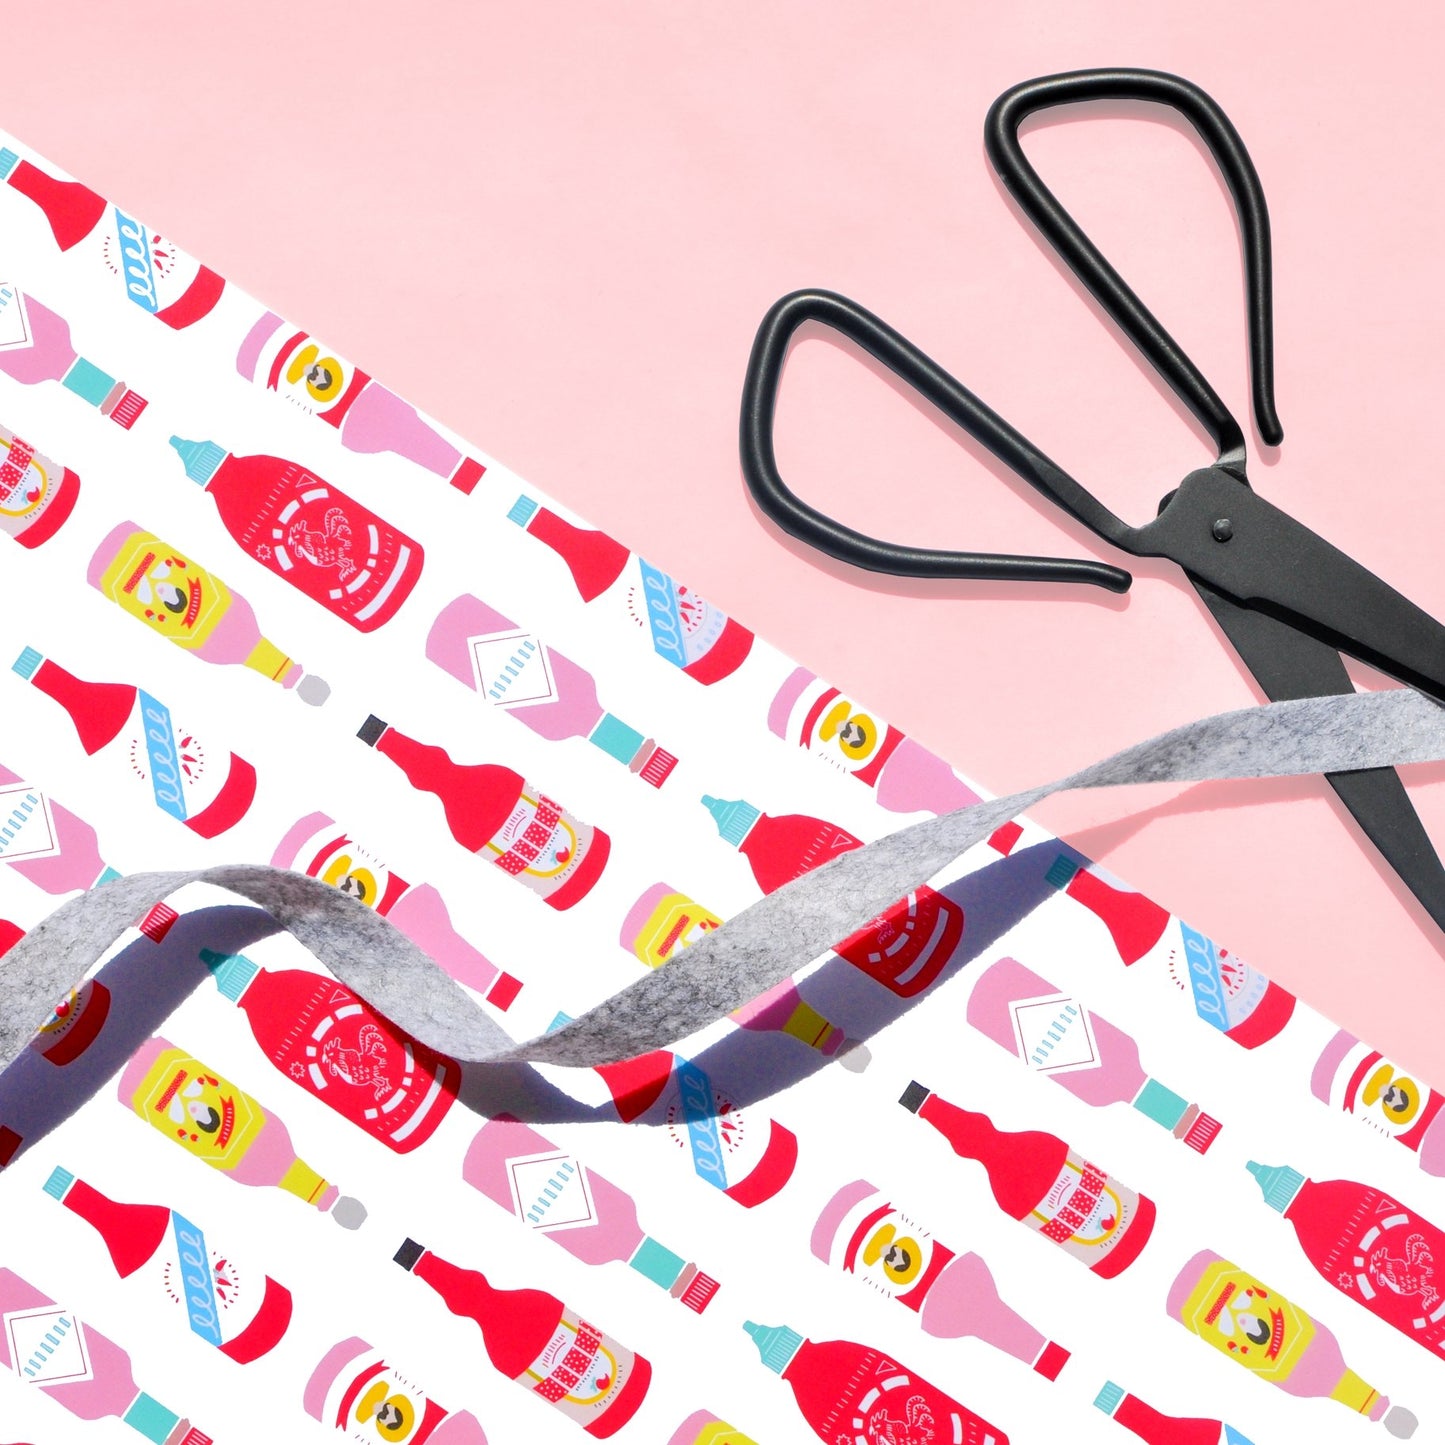 HOT SAUCE WRAPPING PAPER SHEET.